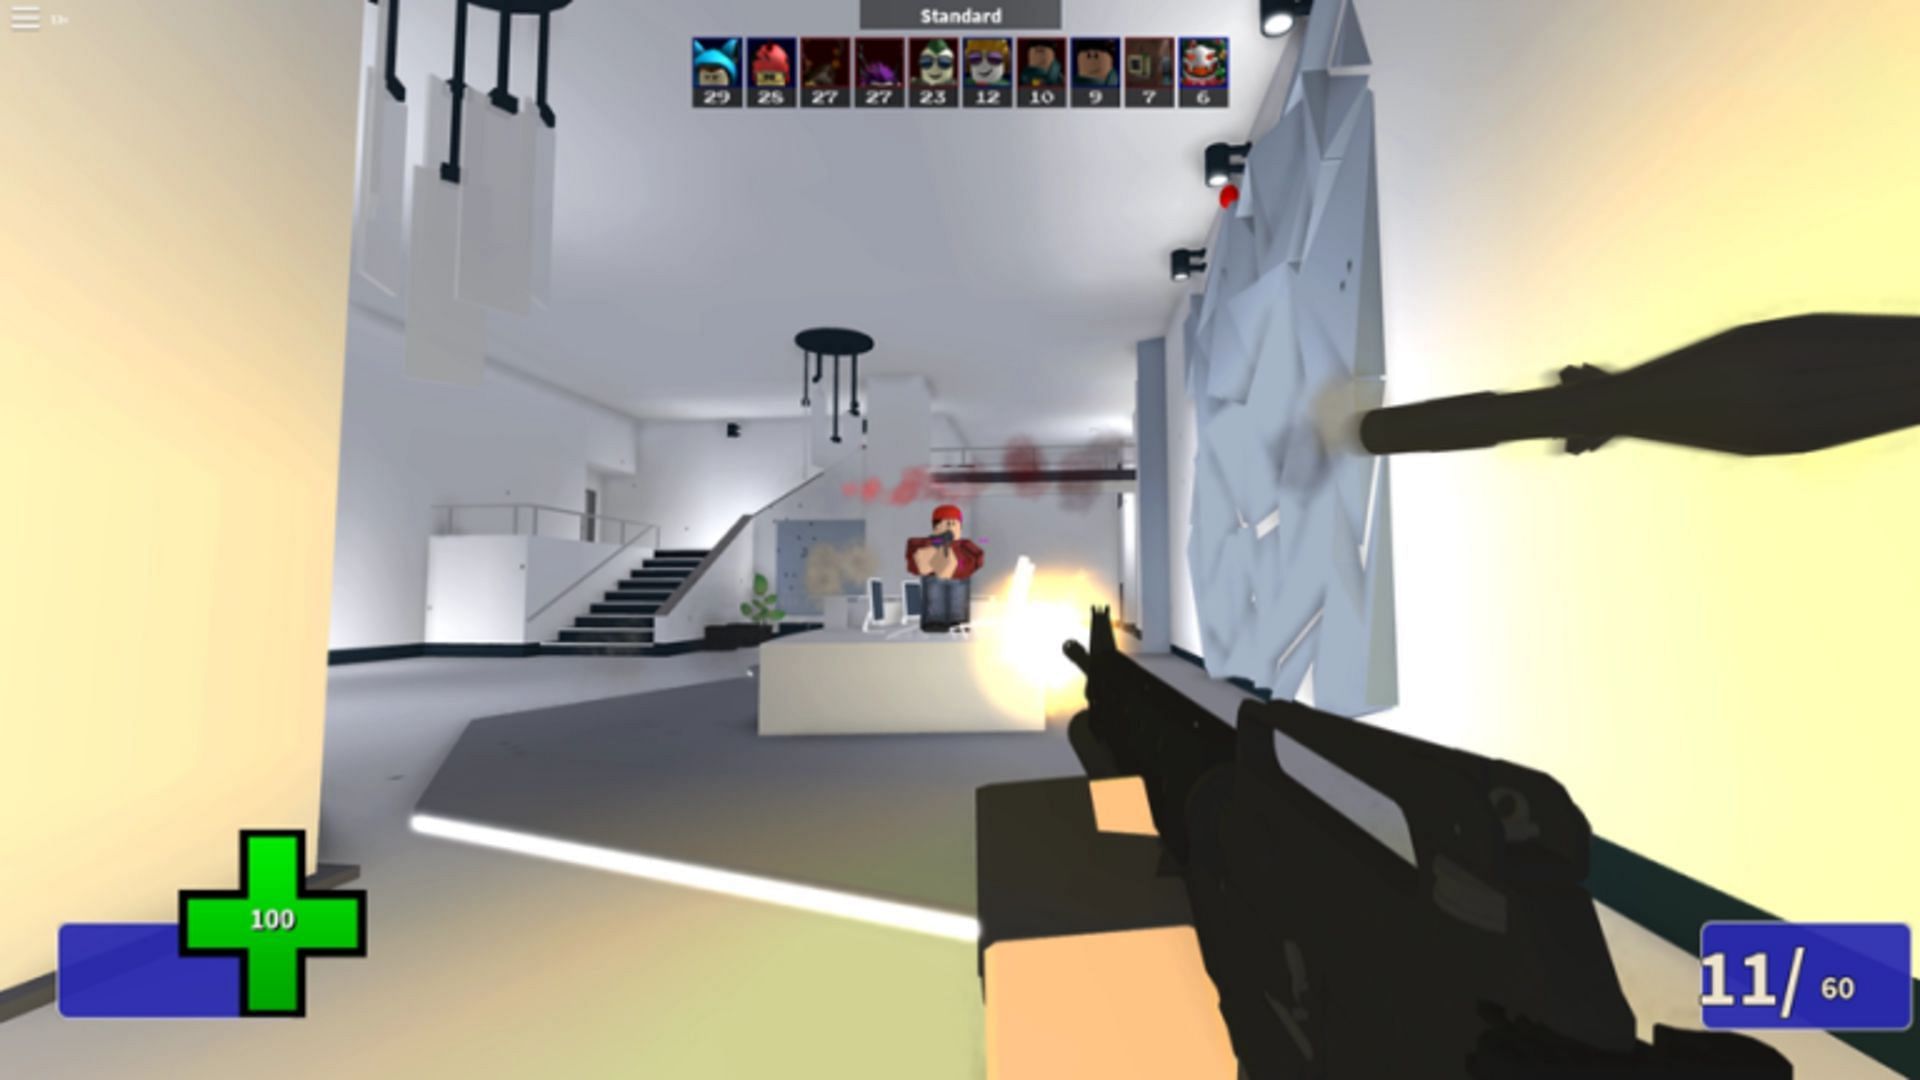 Arsenal: Level 0 to 100 (ROBLOX) 